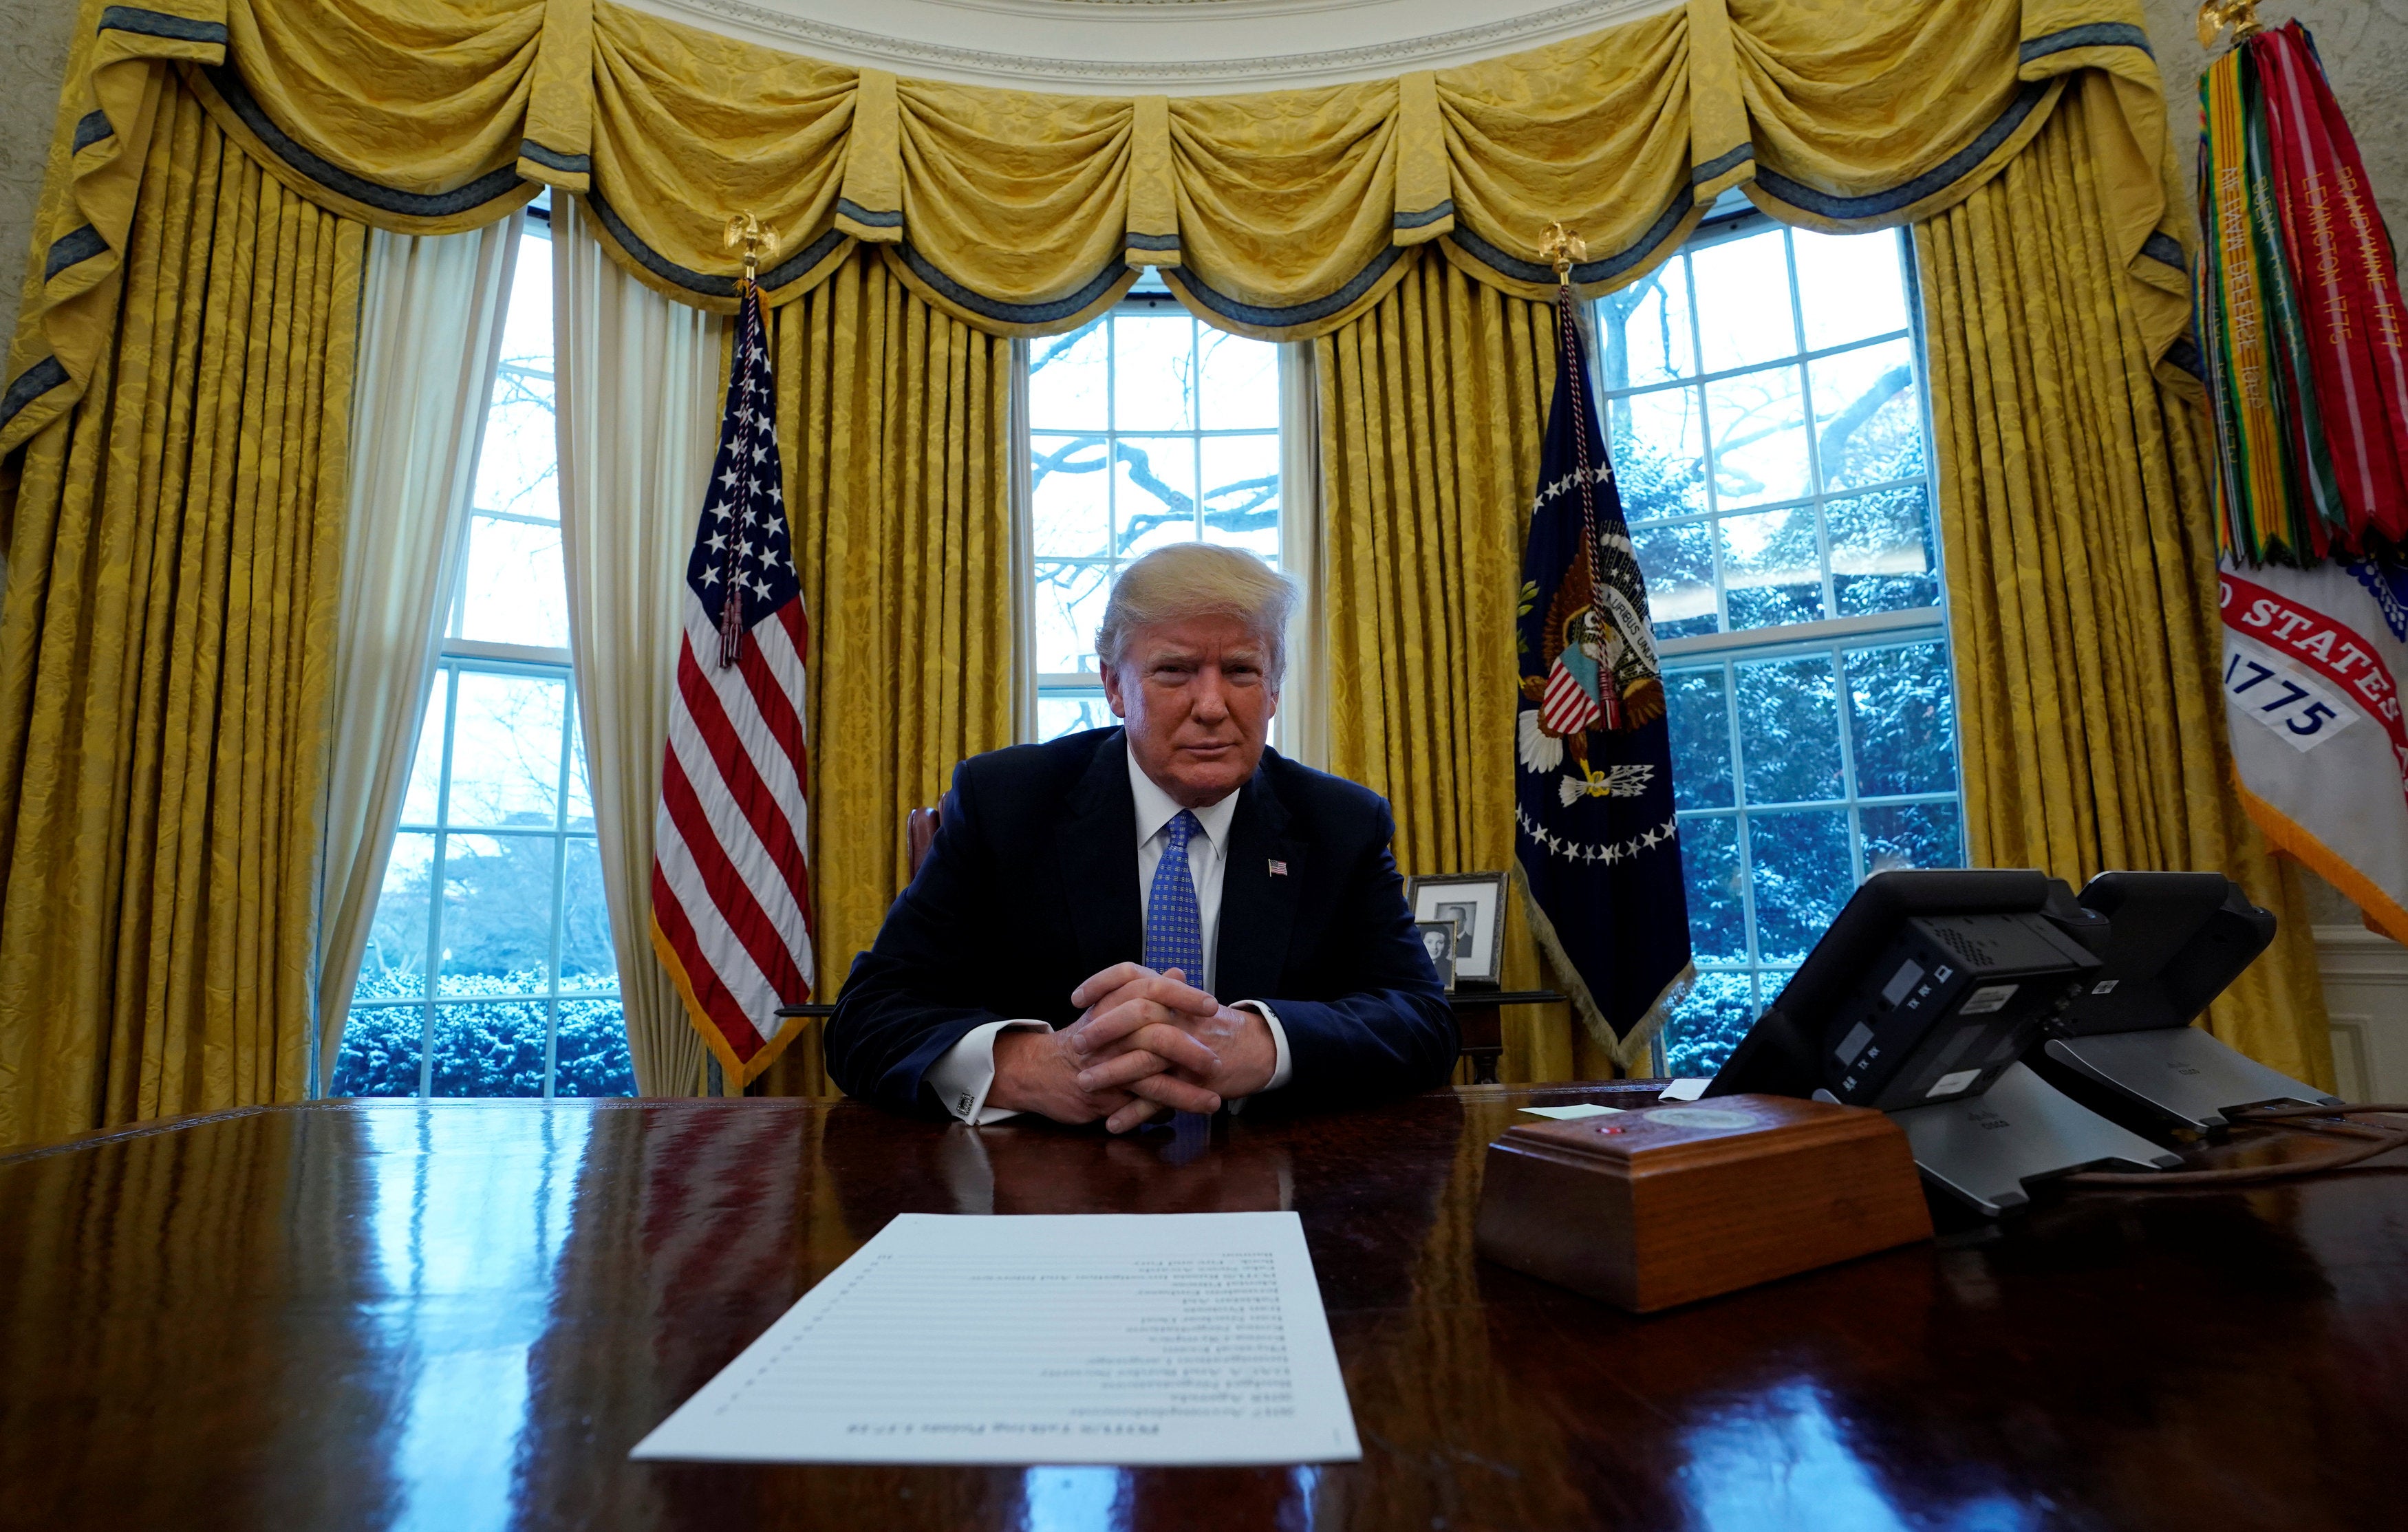 Donald Trump sits at the Resolute Desk